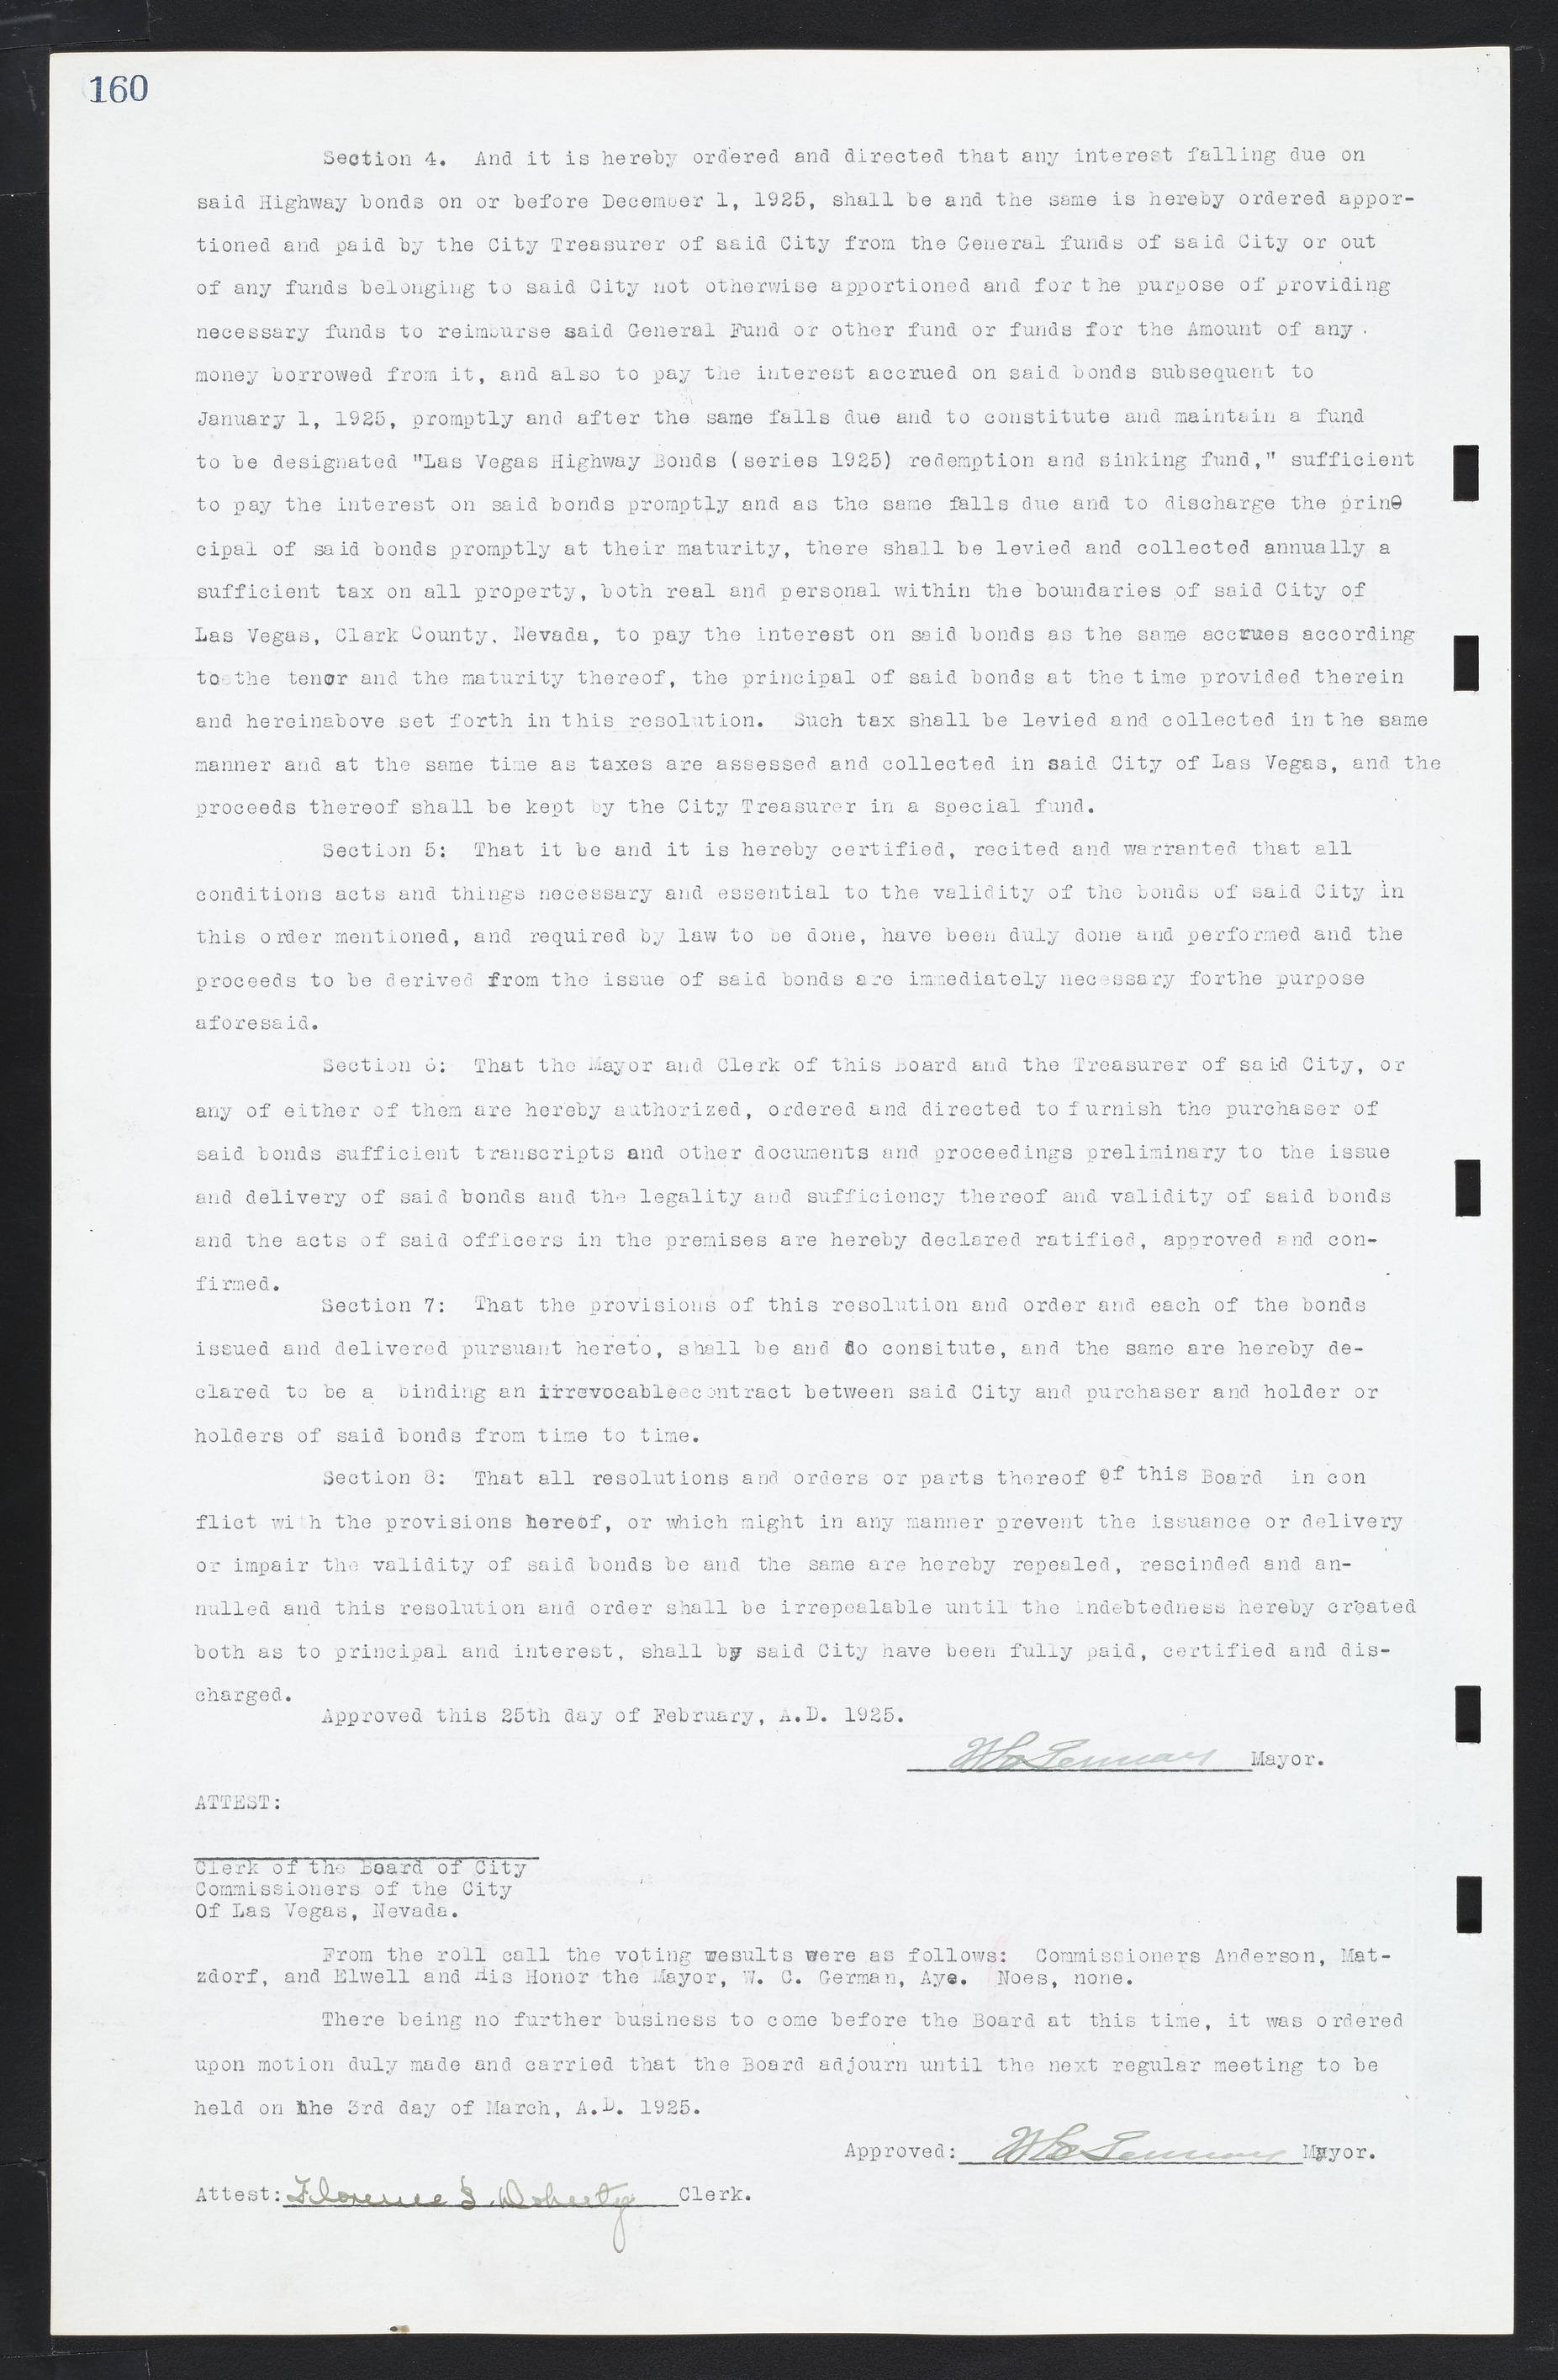 Las Vegas City Commission Minutes, March 1, 1922 to May 10, 1929, lvc000002-167